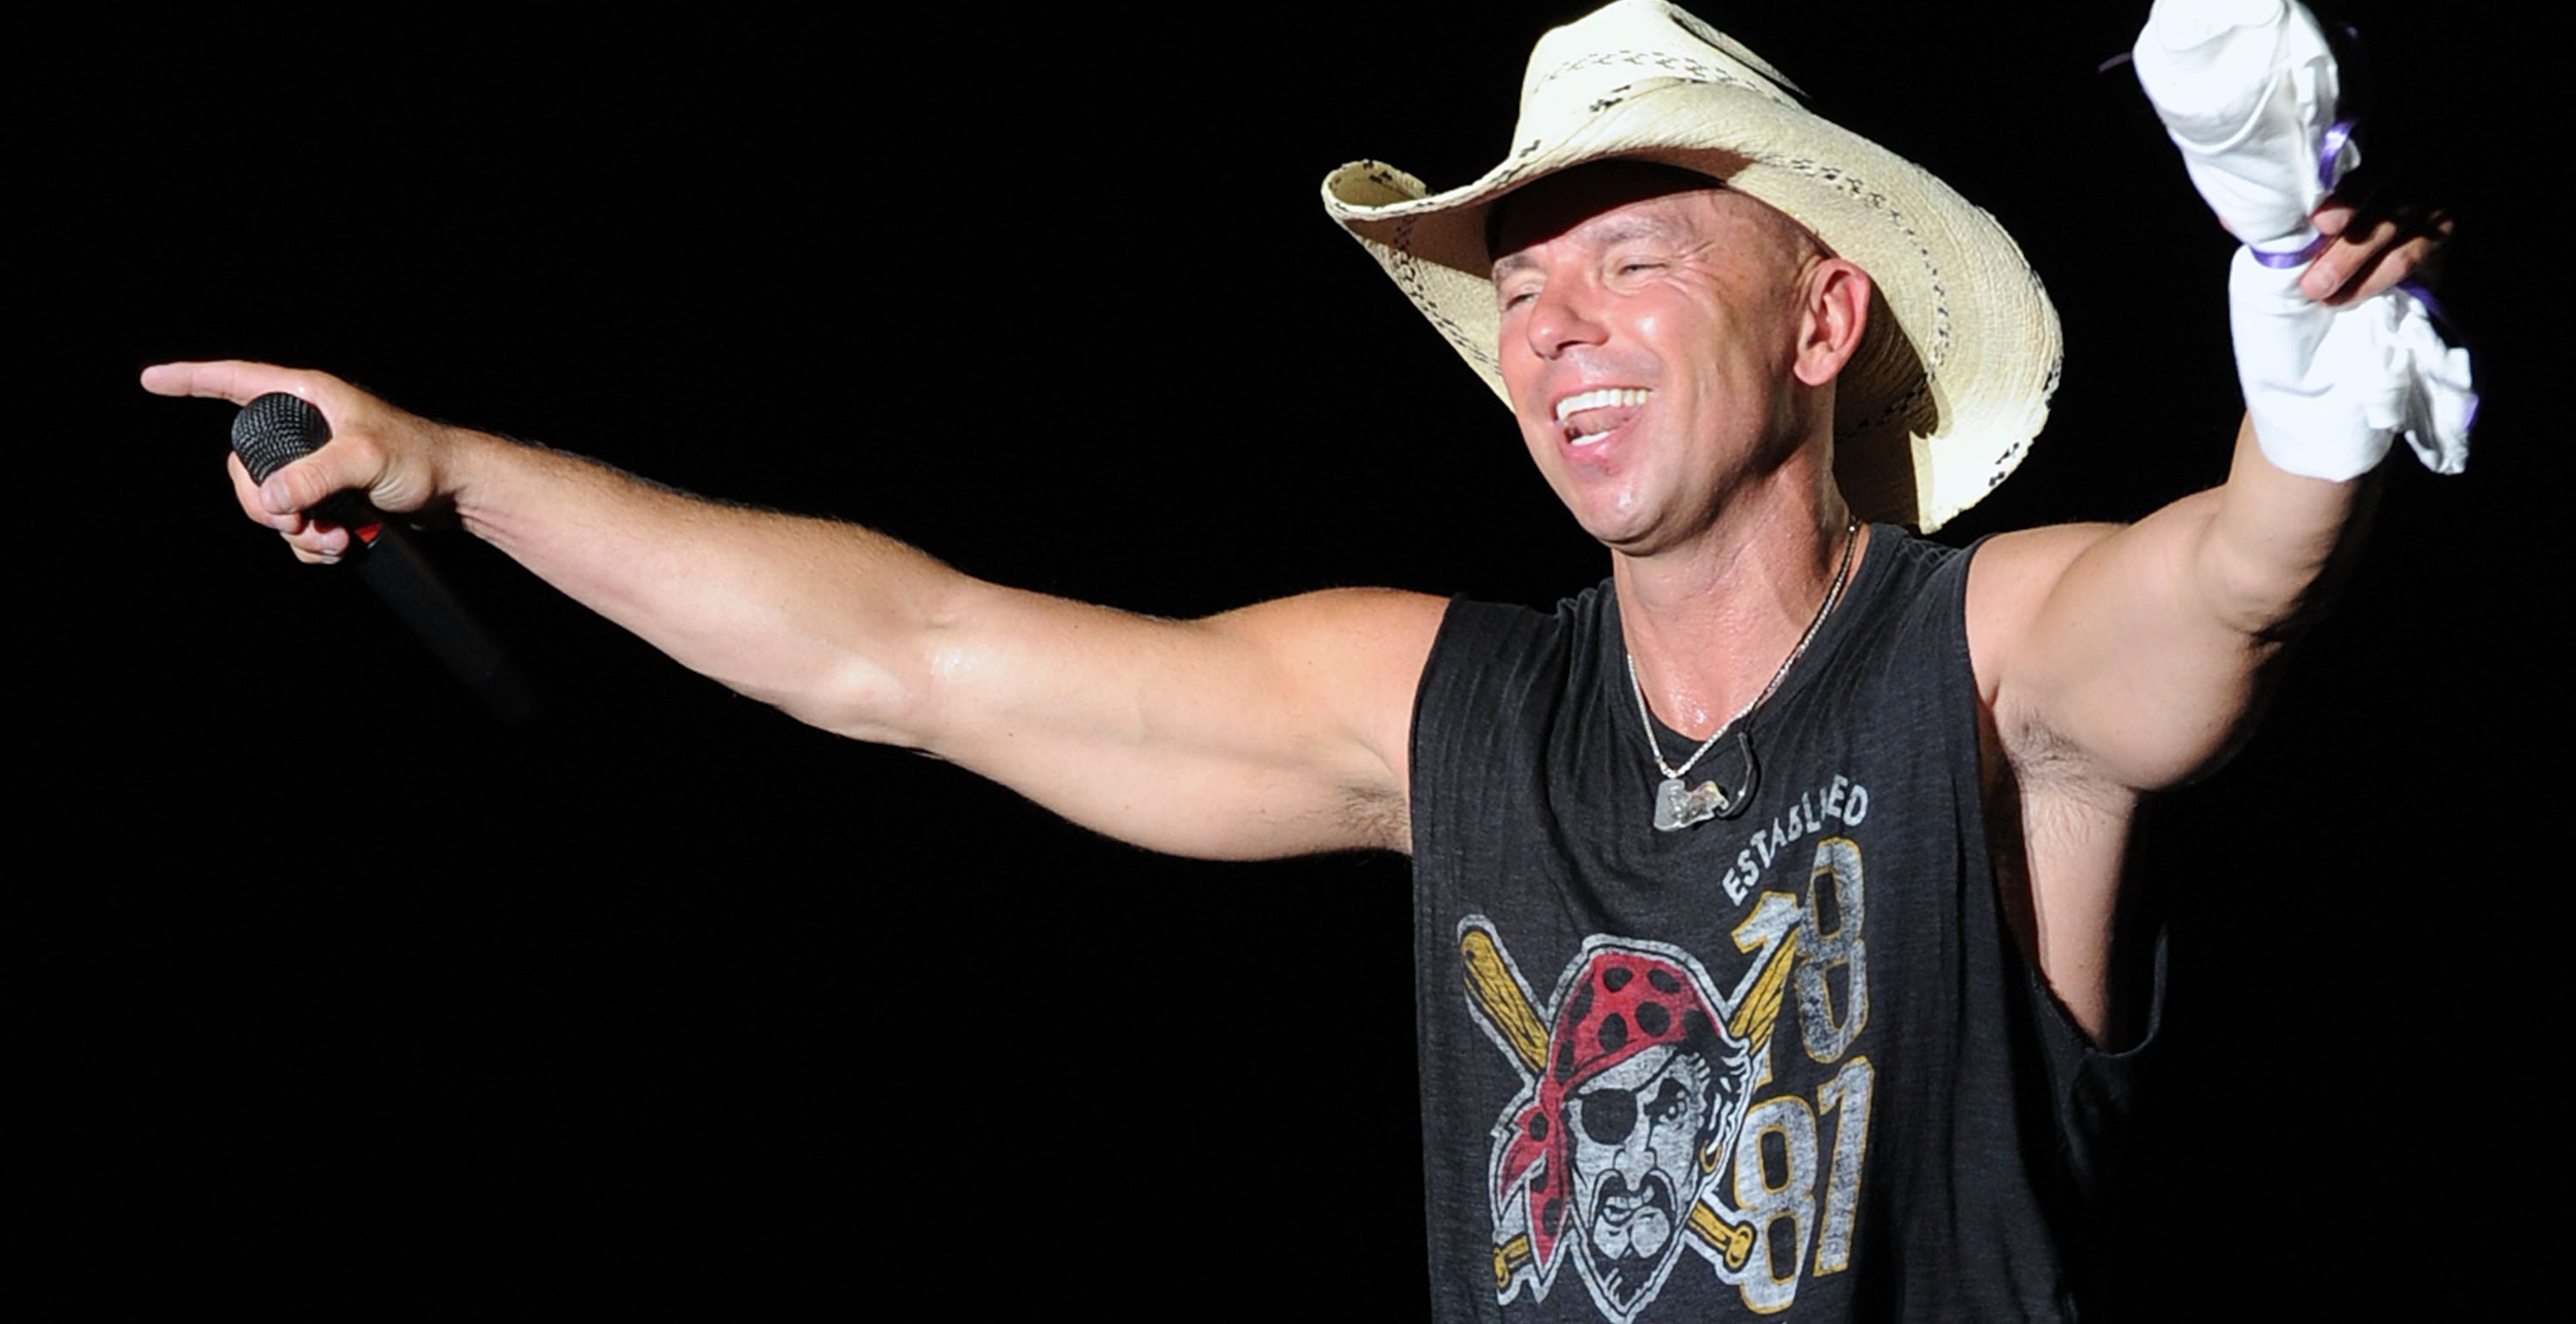 Kenney Chesney Explains Why He Stopped Drinking